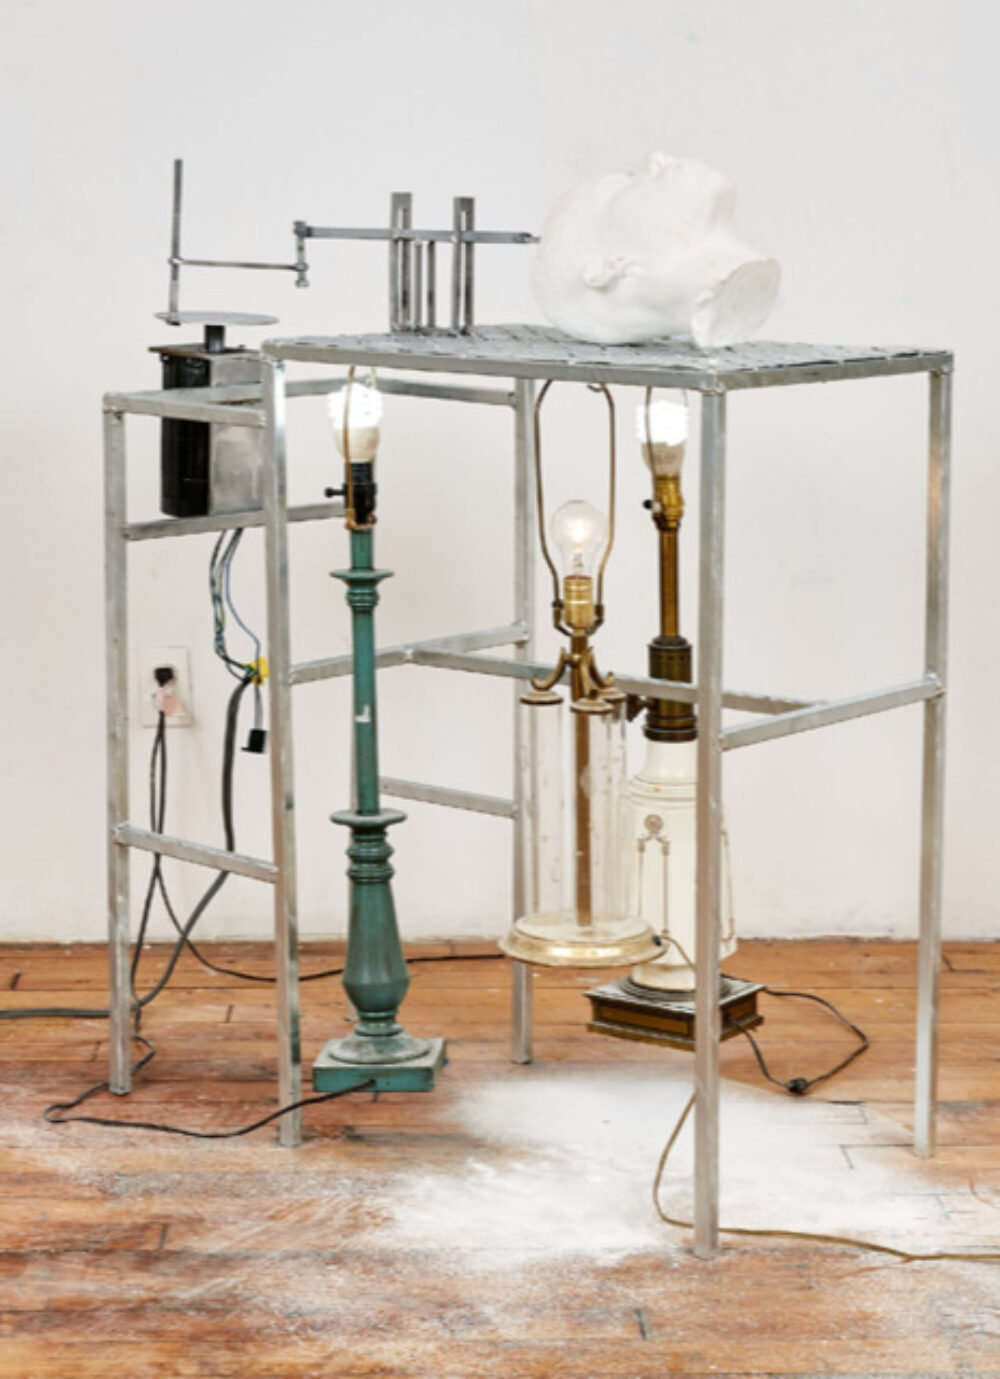 Metal table base with lamps and a white cast human head that's being grated into dust collecting on the floor.